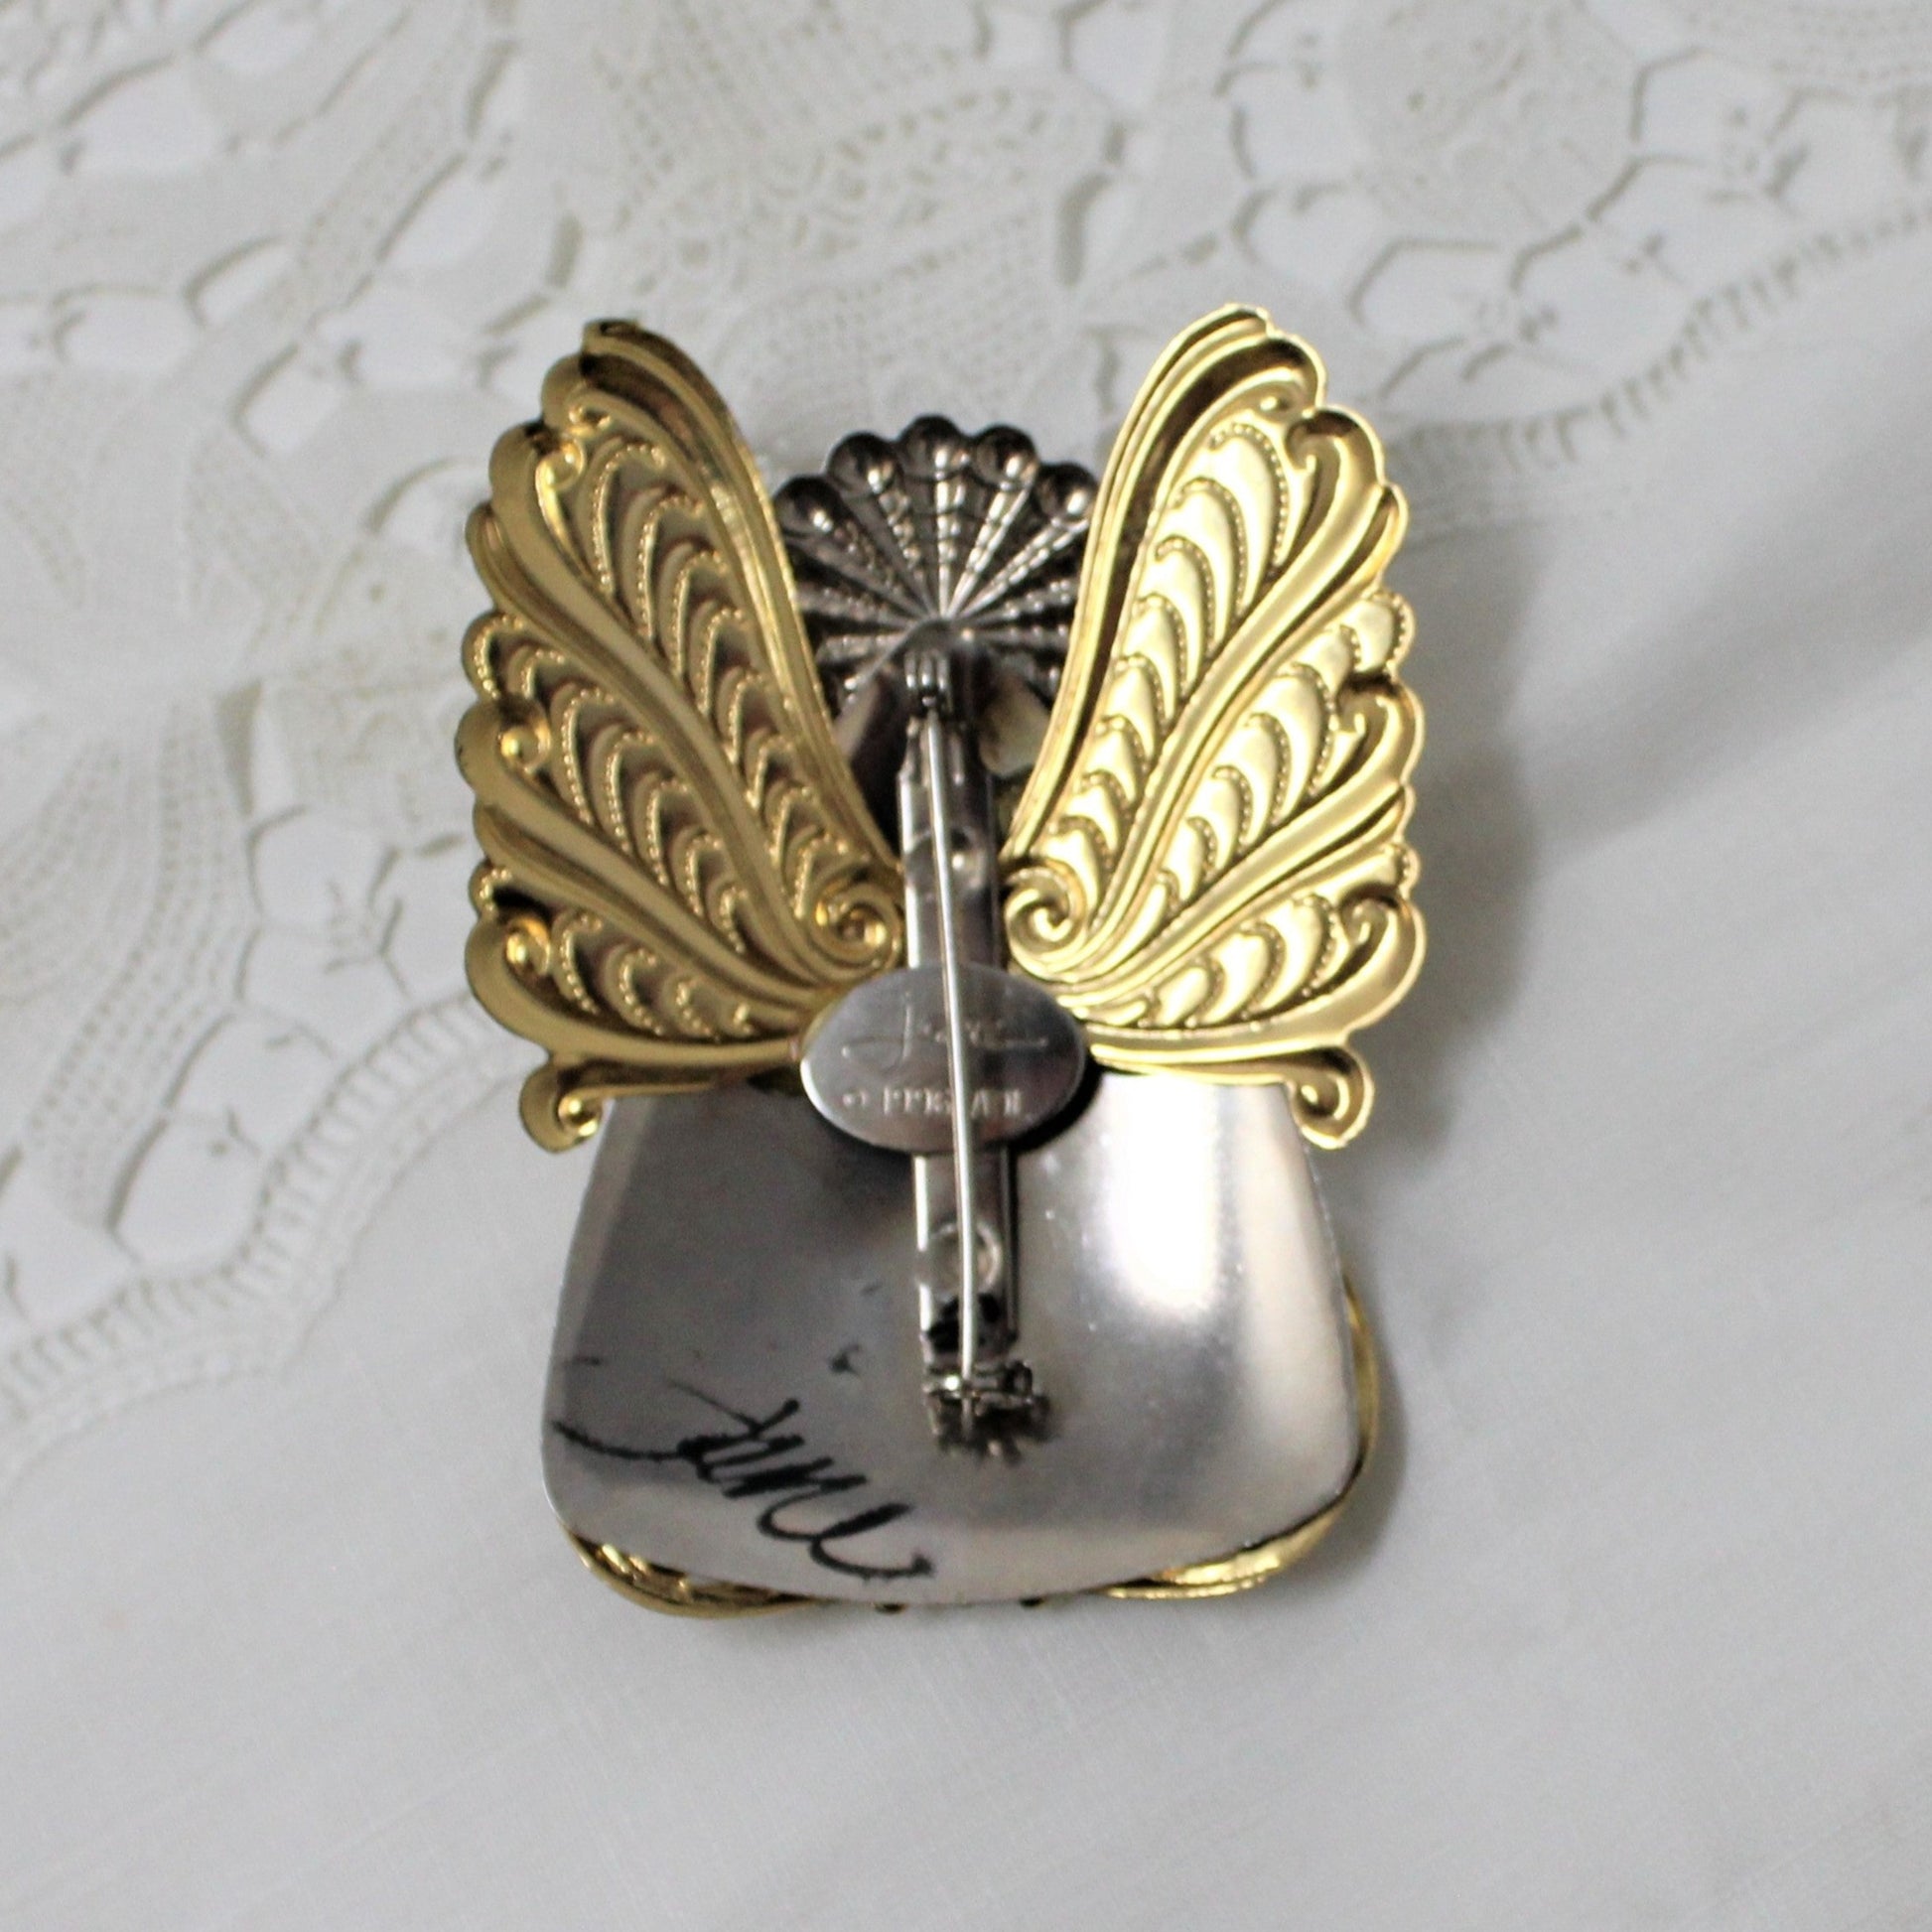 Jane Davis Angel pin/brooch, back view with signature